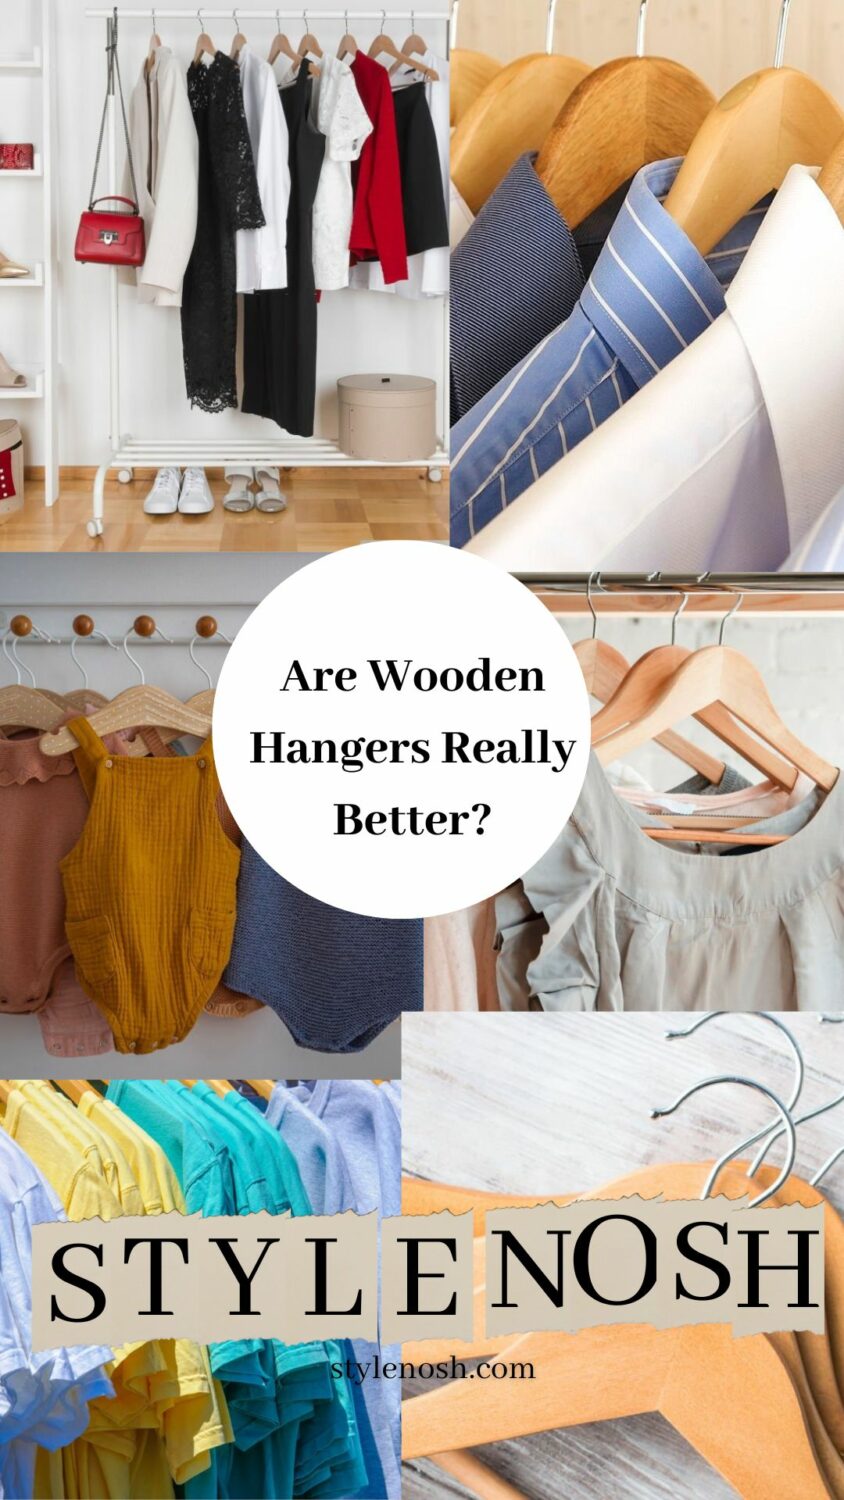 Hang your clothes in style with the timeless quality of wooden hangers.